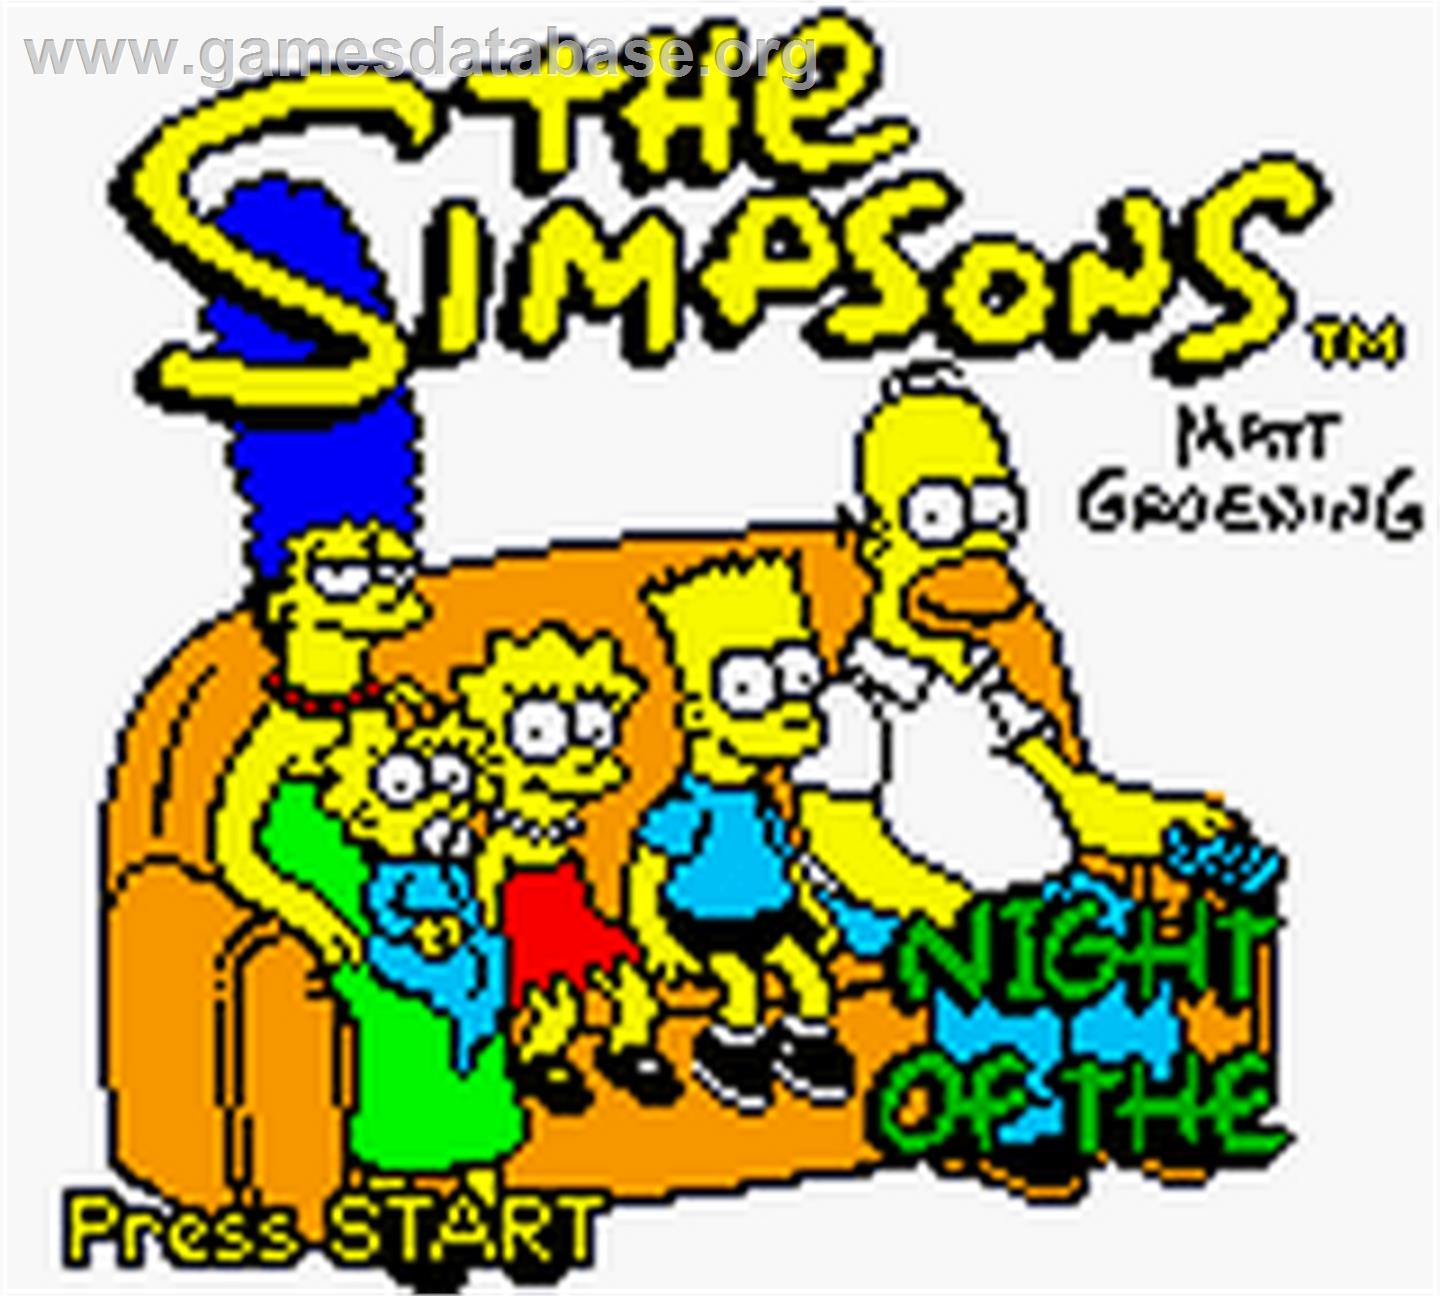 Simpsons: Night of the Living Treehouse of Horror - Nintendo Game Boy Color - Artwork - Title Screen